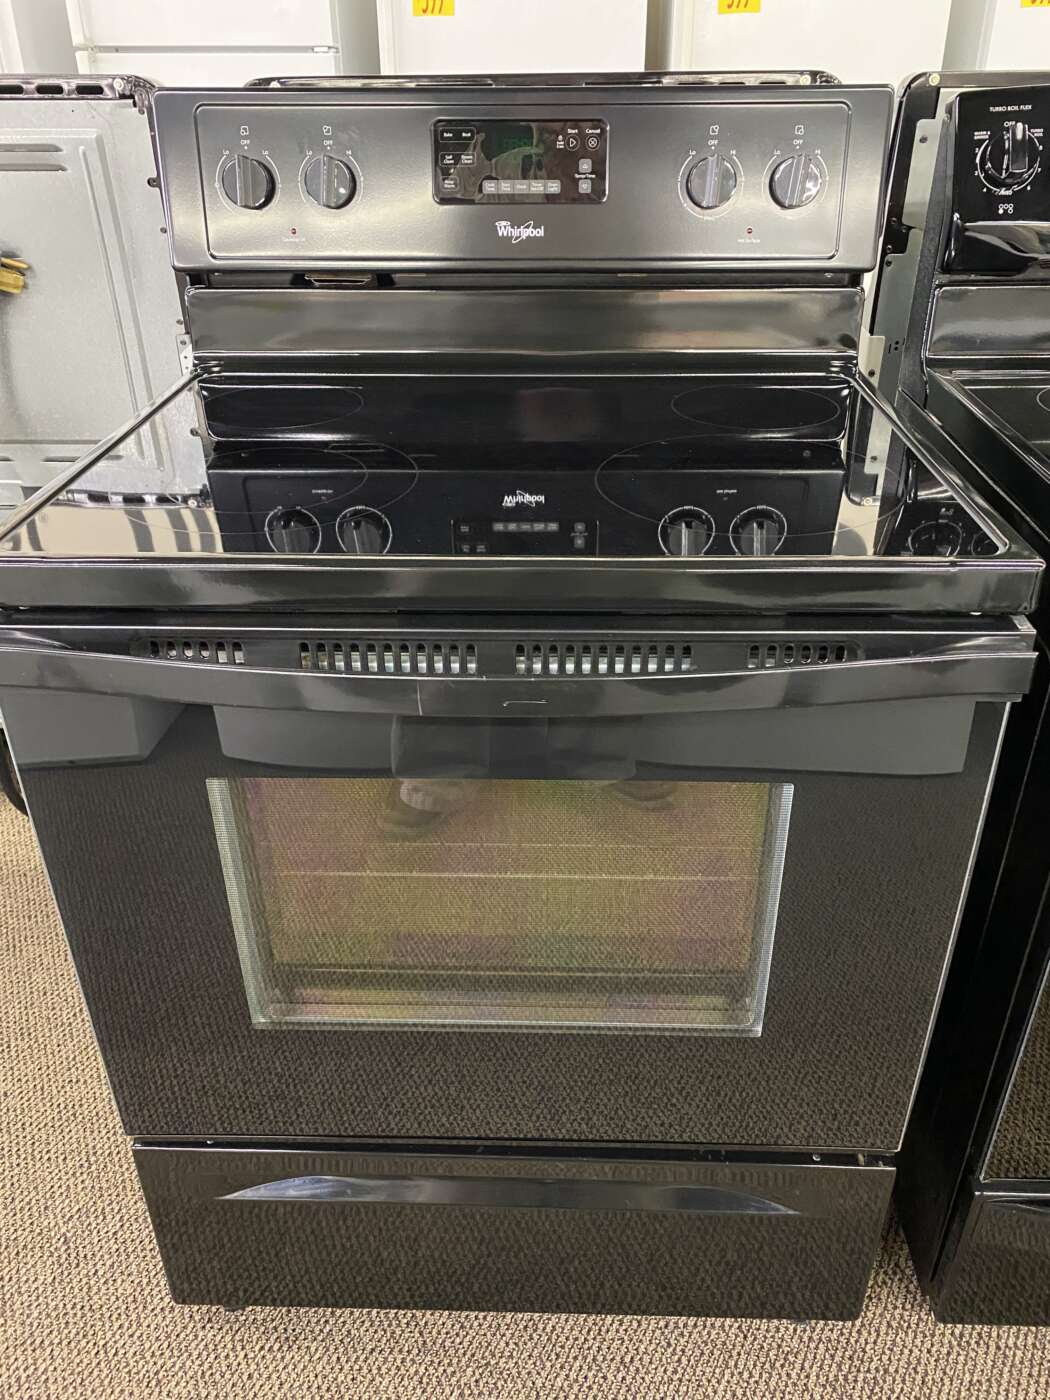 Reconditioned WHIRLPOOL Self-Clean Electric Range – Black